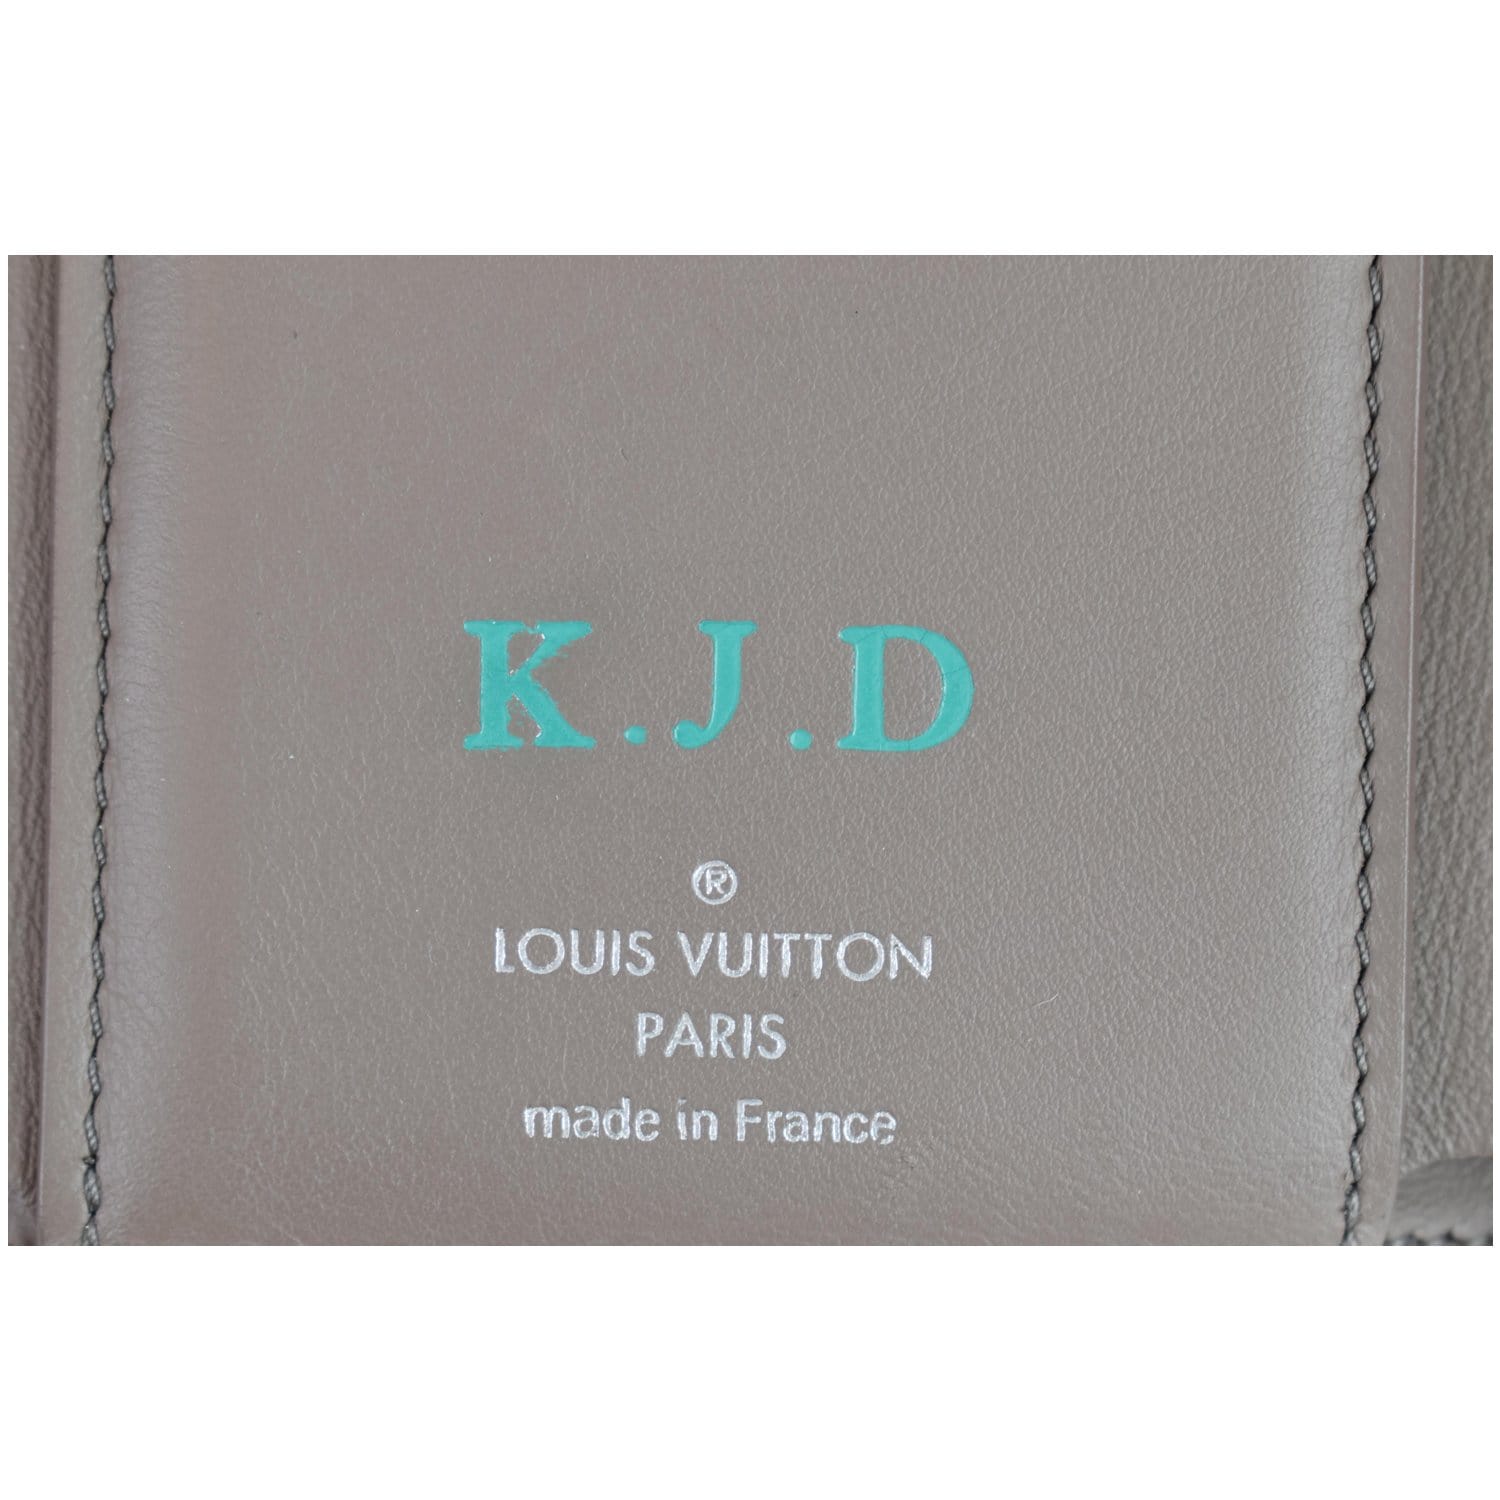 LOUIS VUITTON CAPUCINES COMPACT WALLET TAURILLON LEATHER Like New